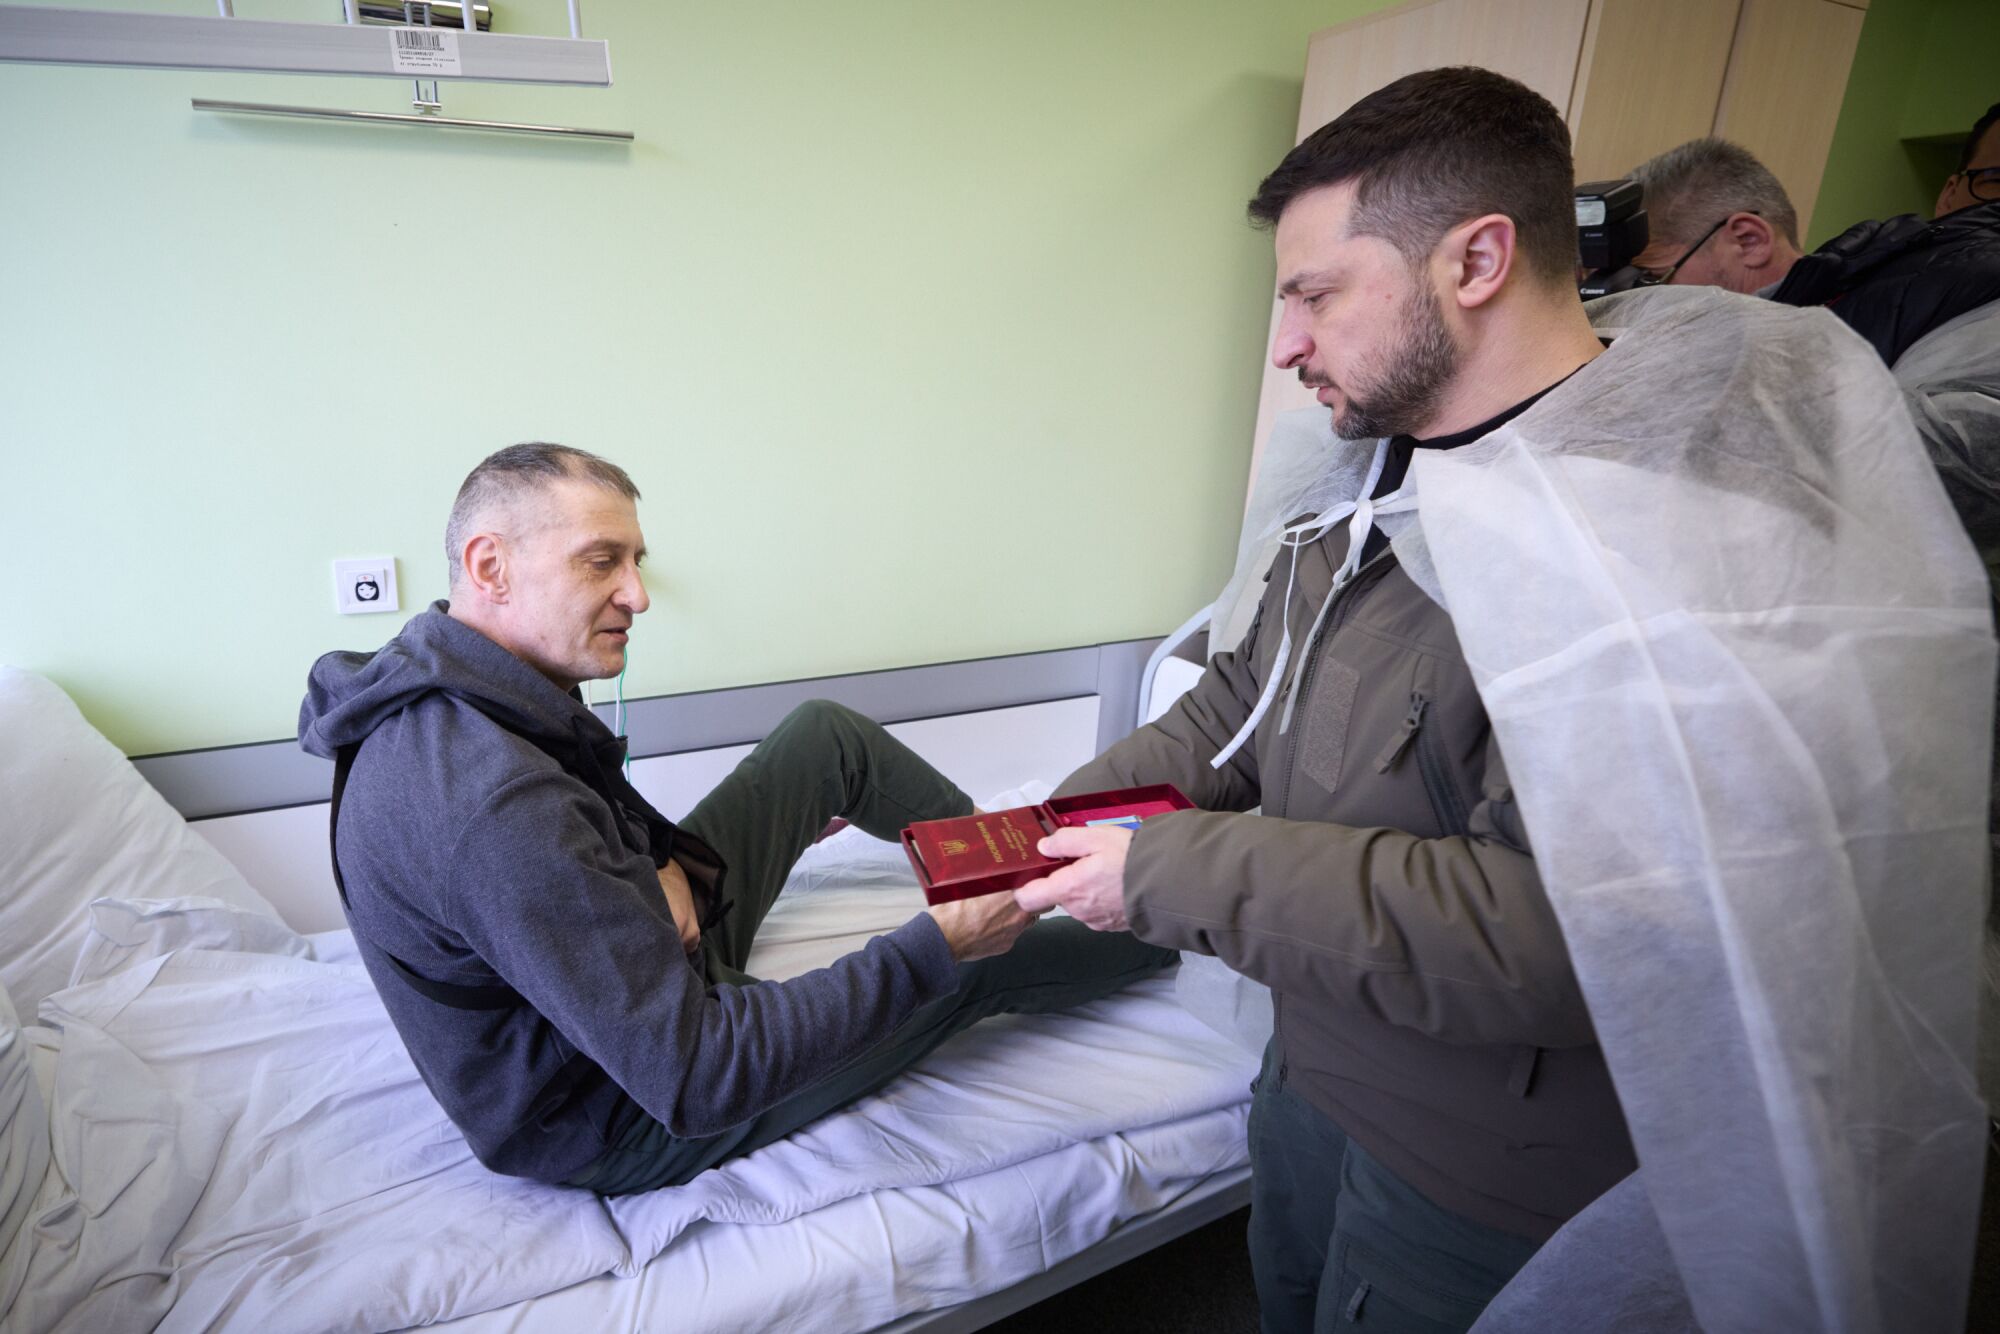 Ukrainian President Volodymyr Zelensky visits injured soldiers to hand out medals.